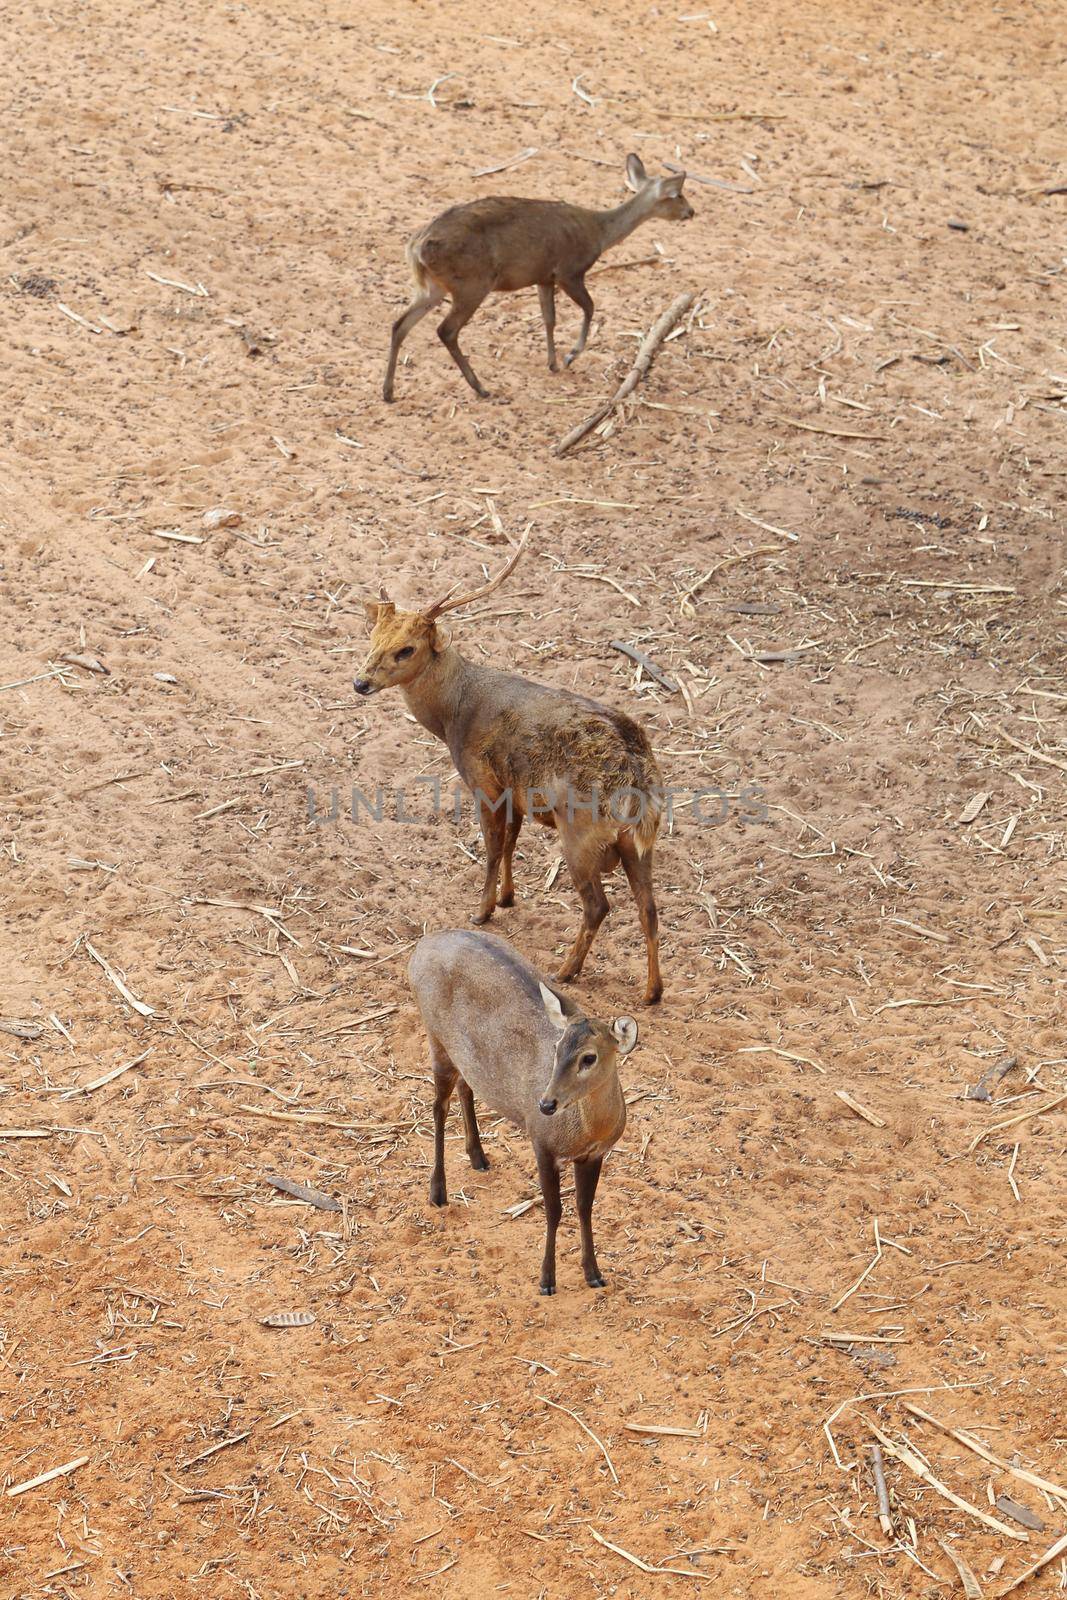 deer standing on the red dry soil